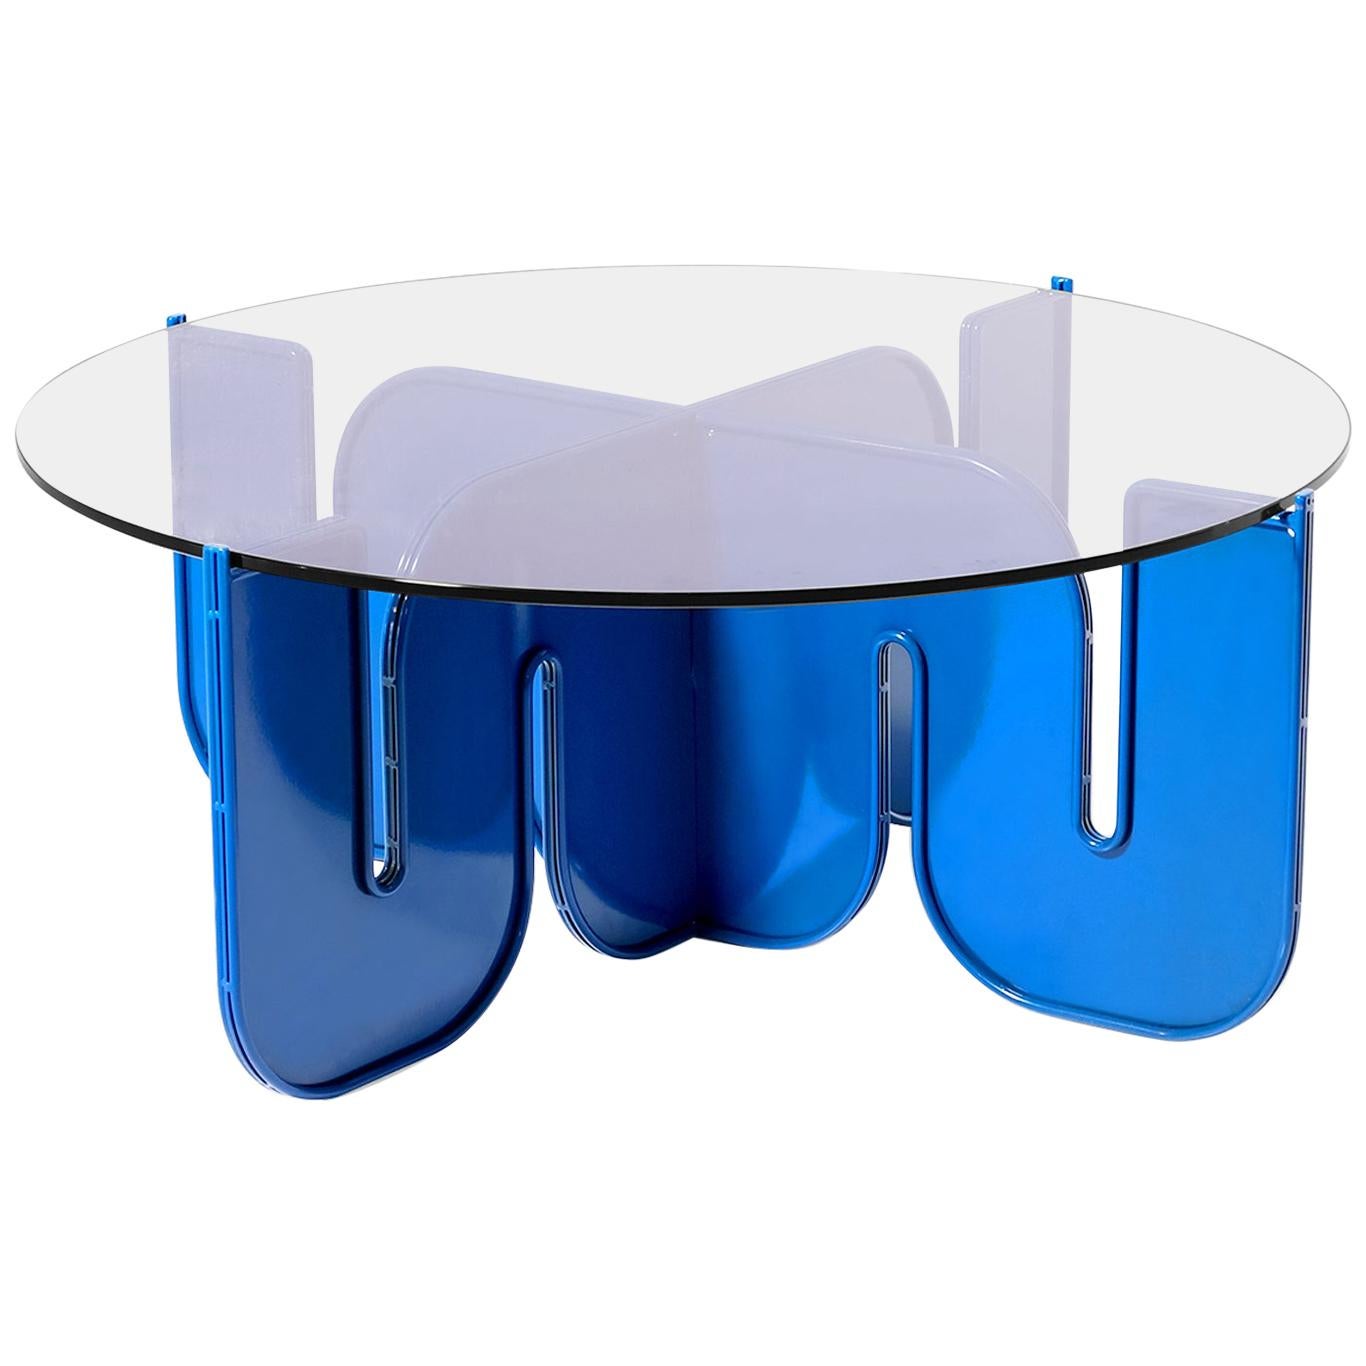 Modern Coffee Table, Flat Pack Center Table in Electric Blue, Clear Glass